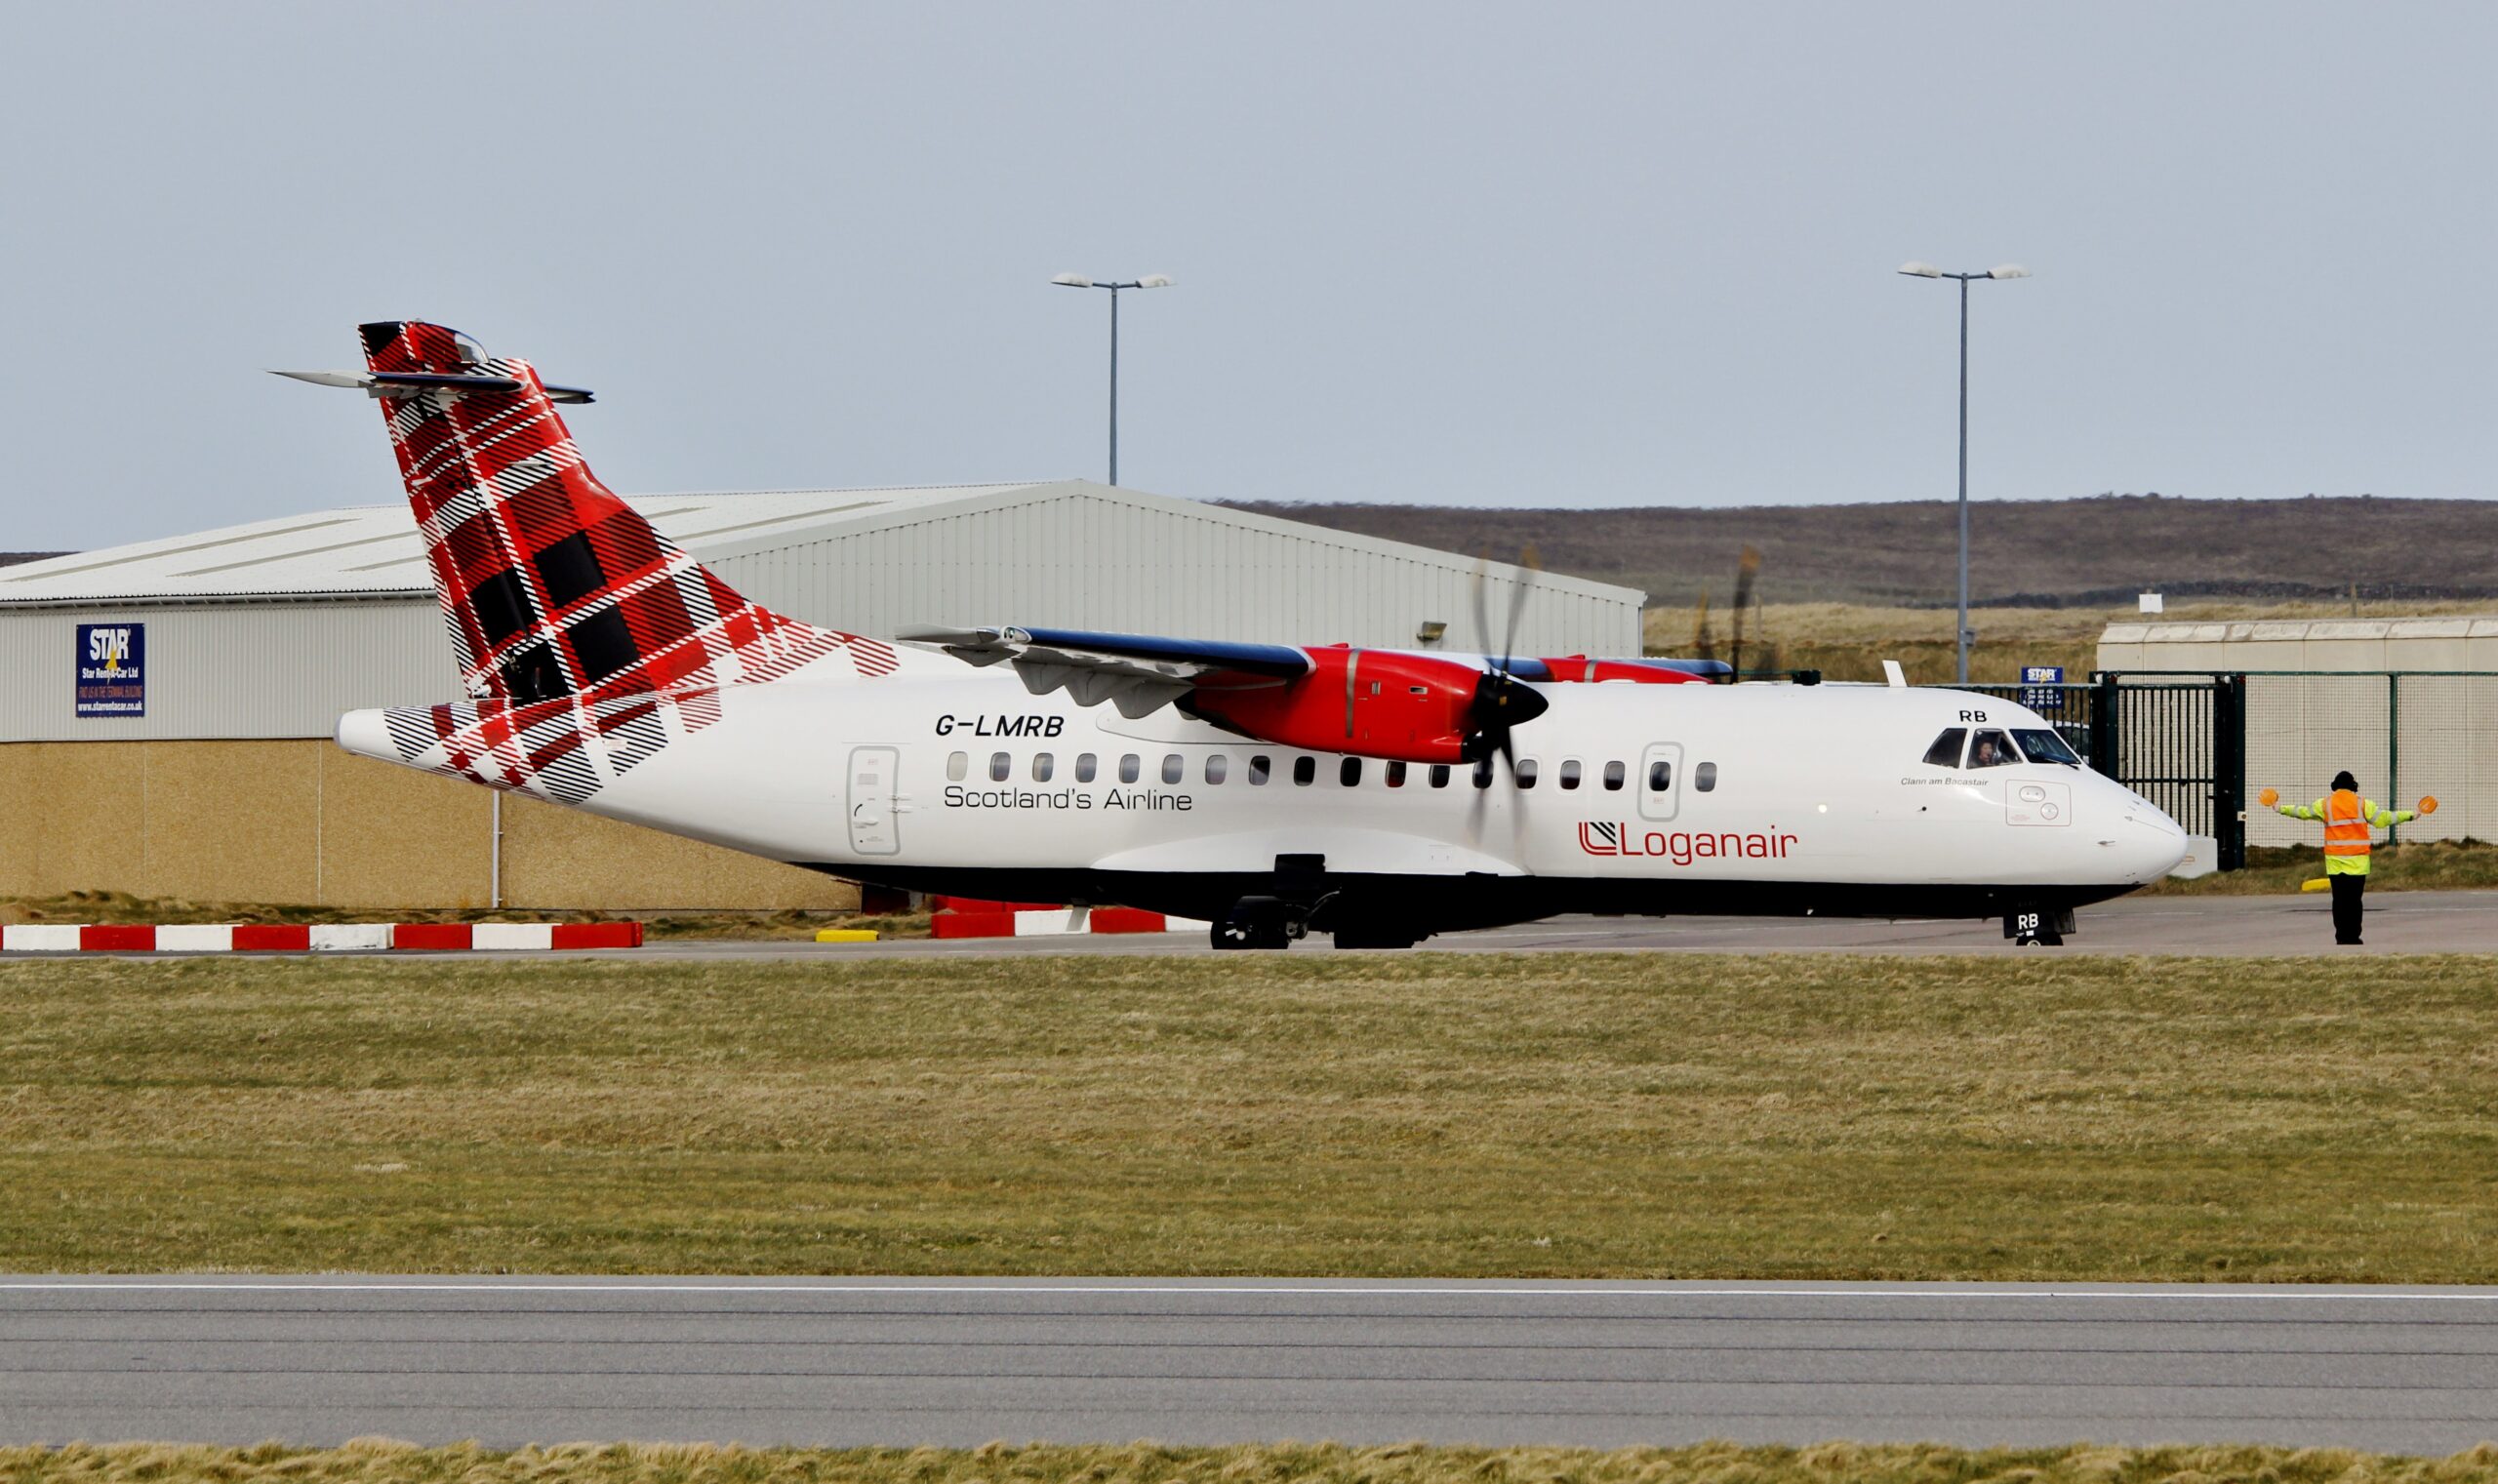 Loganair currently flies to over 40 destinations in the UK and beyond